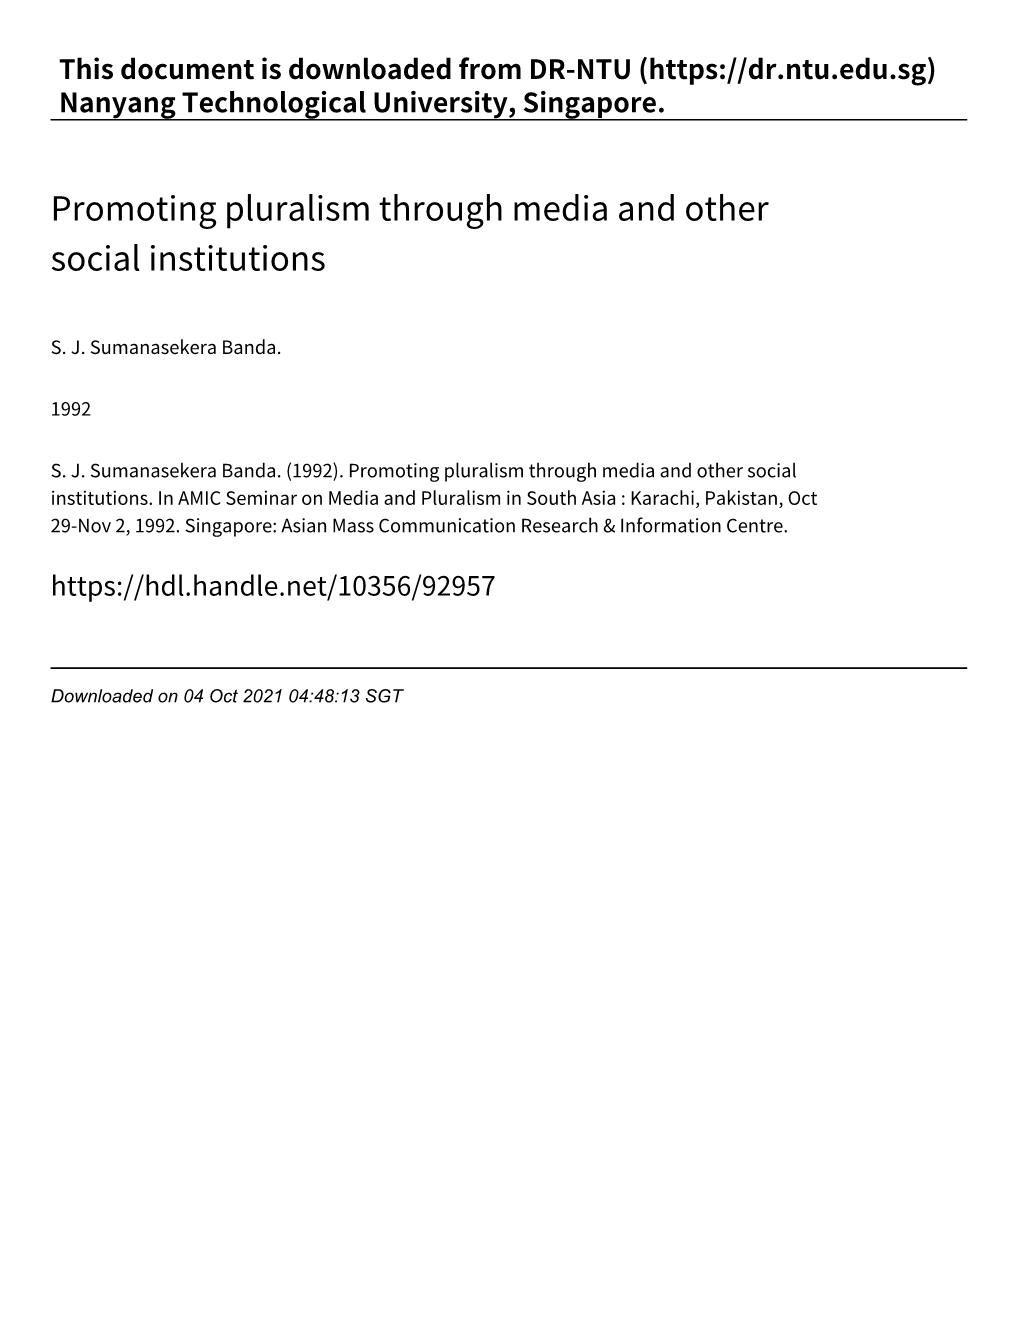 Promoting Pluralism Through Media and Other Social Institutions